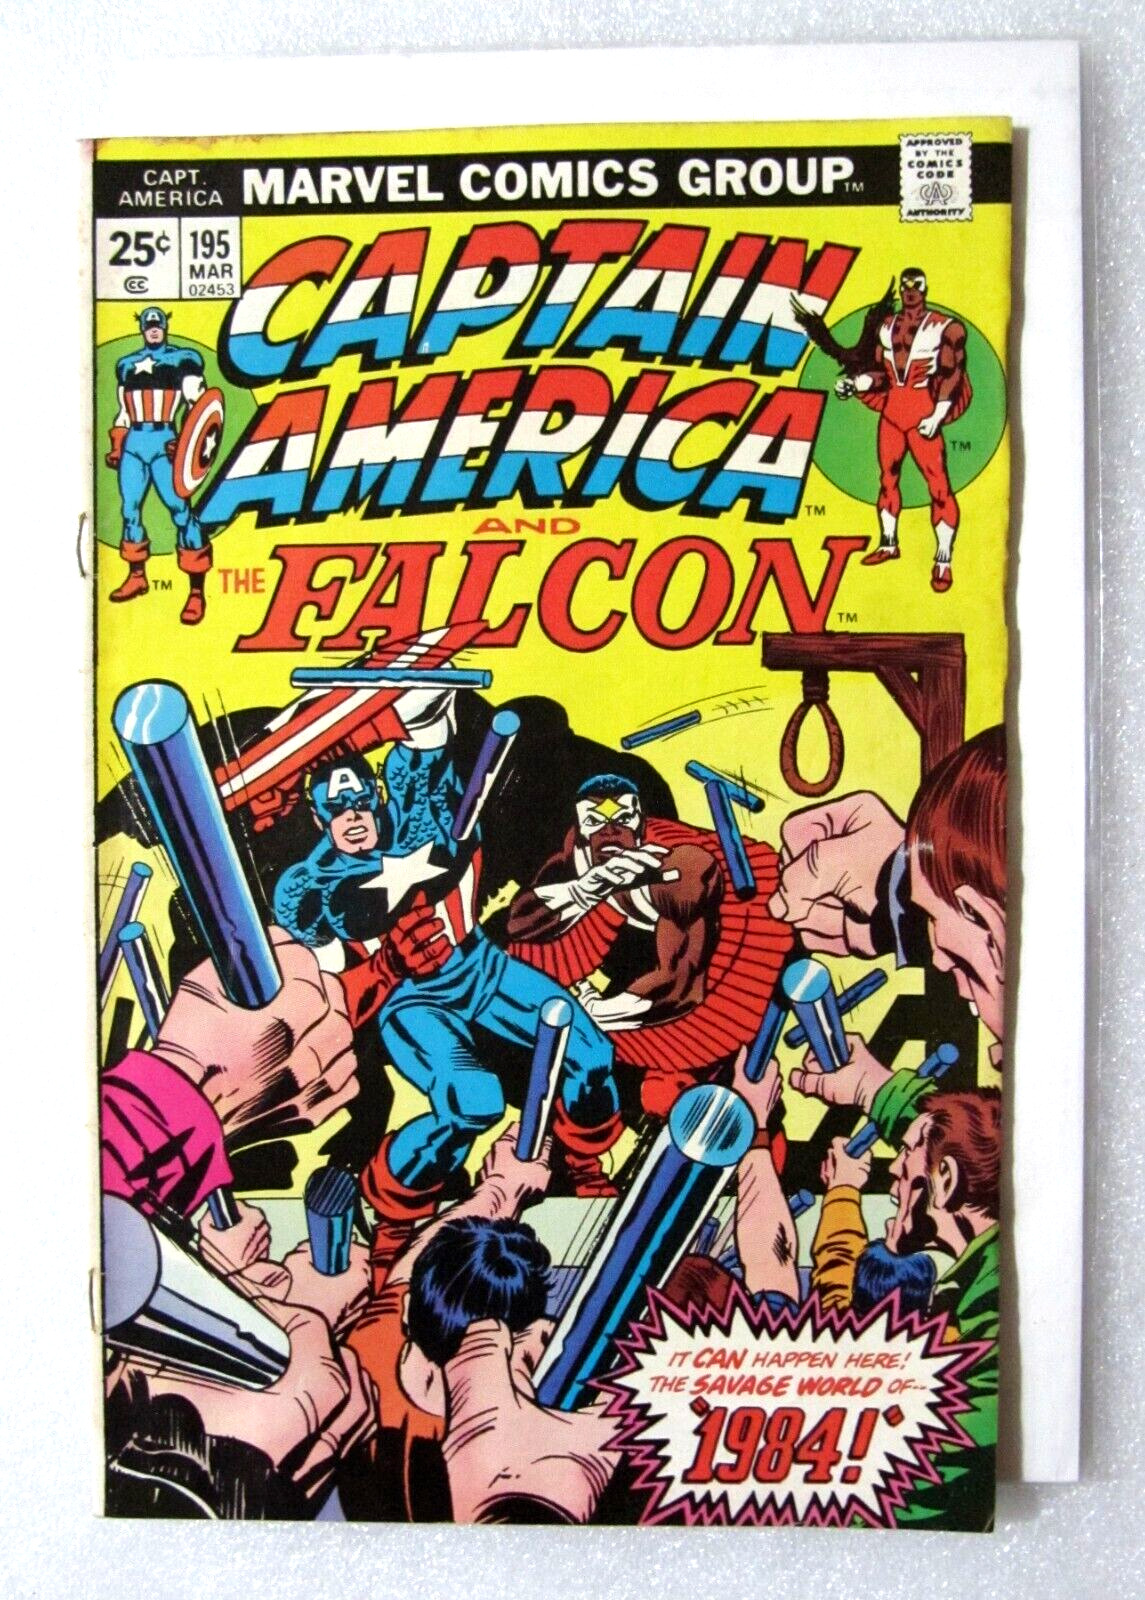 CAPTAIN AMERICA #195 1976 BRONZE AGE MARVEL COMIC JACK KIRBY - BAGGED & BOARDED